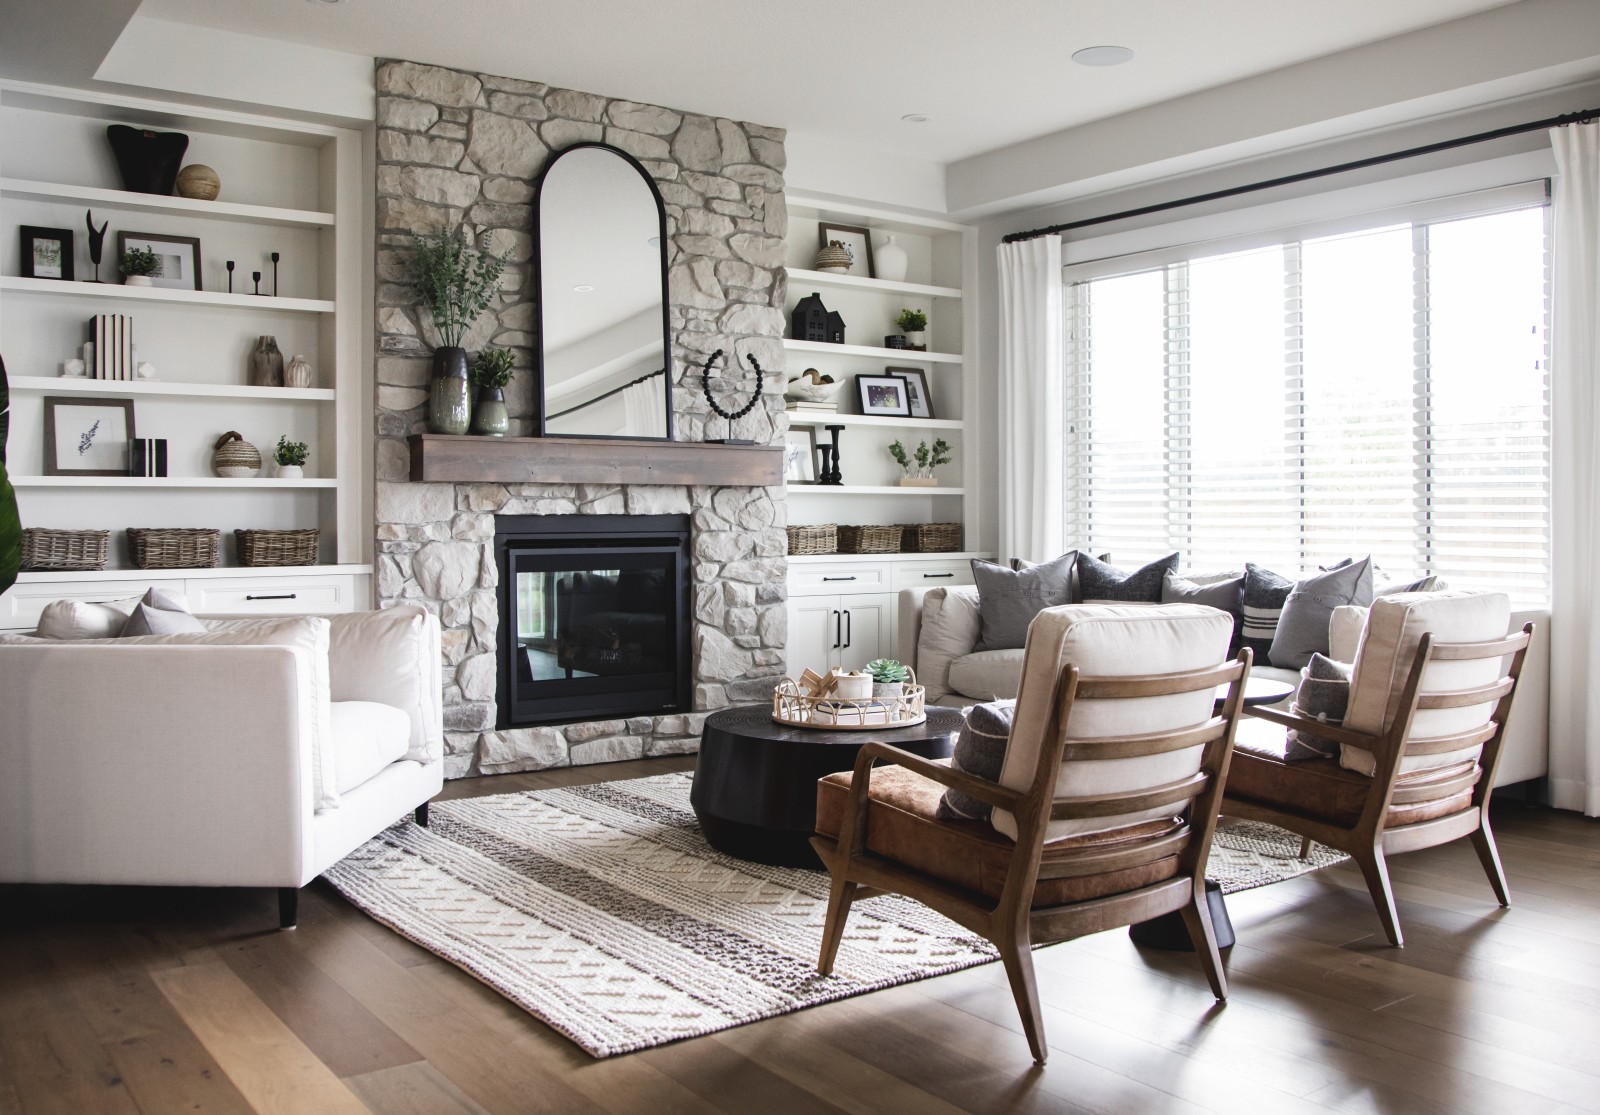 A fireplace clad in light grey stone from floor to ceiling with a warm wood mantle is the focal point of the photo. A cozy couch is placed to the side of the fireplace in front of the large window in the back of the home. Wood accents are carried in to the chairs seated opposite of the fireplace.